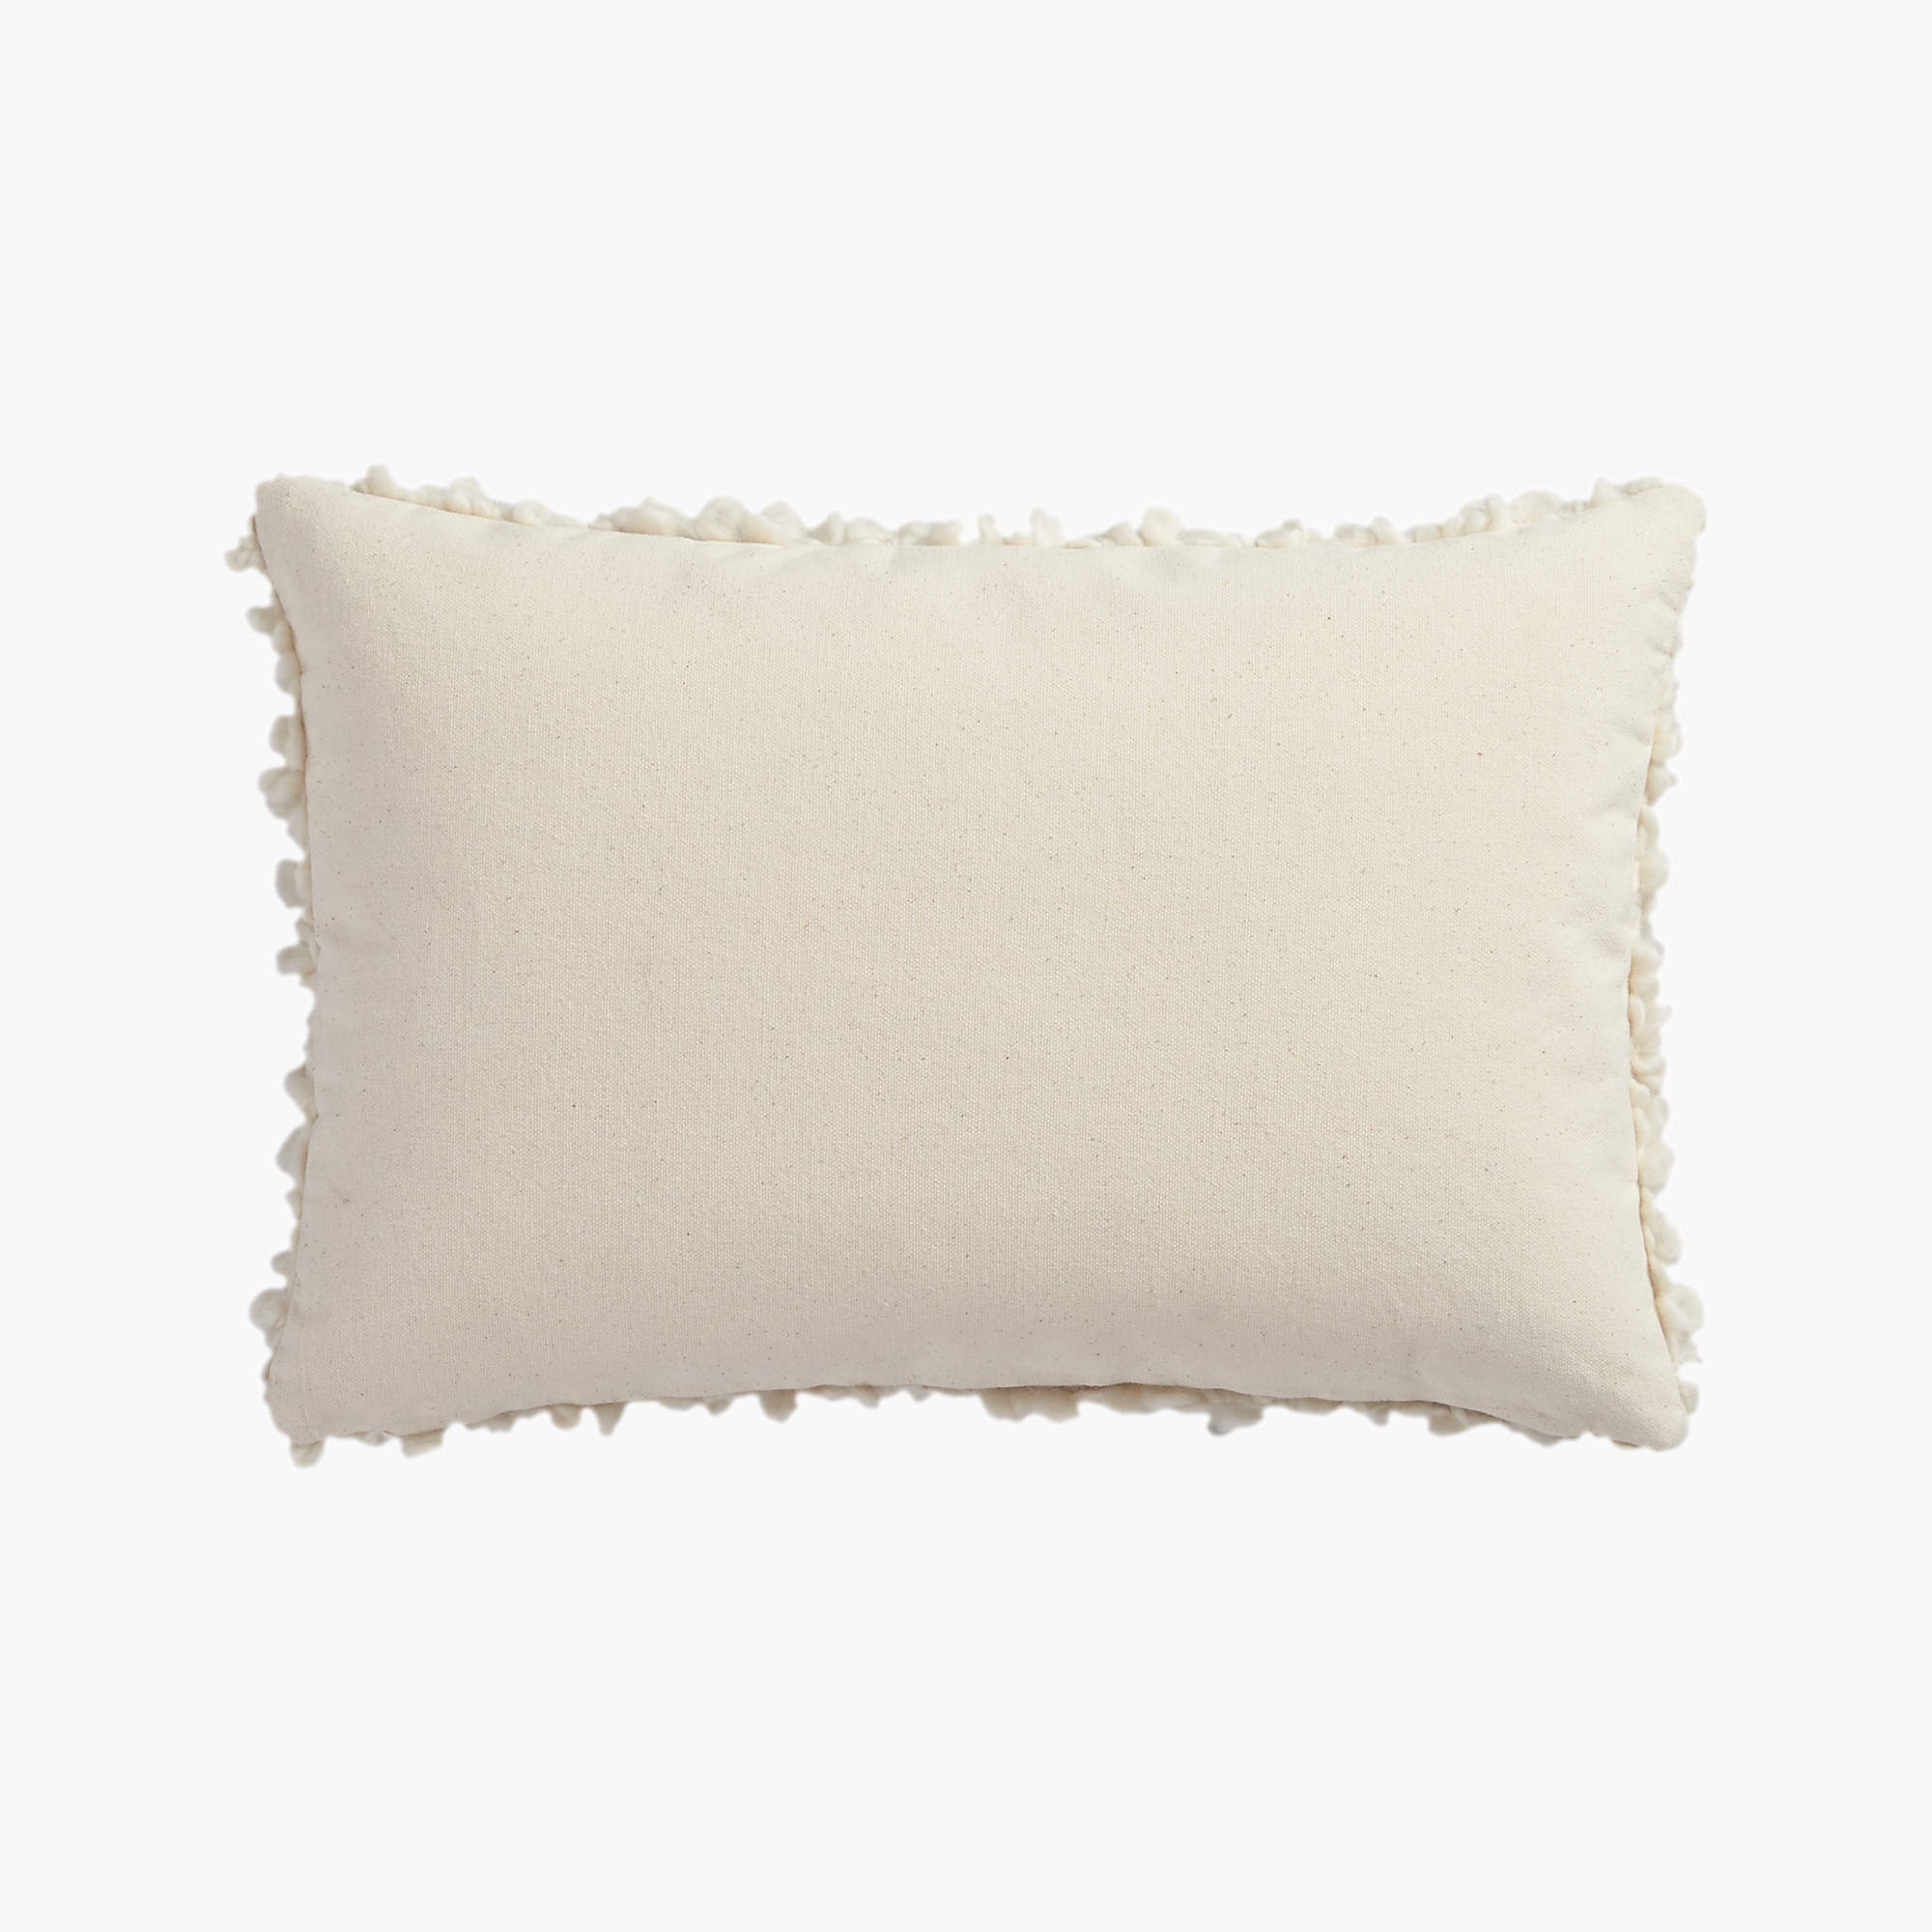 Toodle Pillow with Down-Alternative Insert, Ivory, 18" x 12" - Image 2